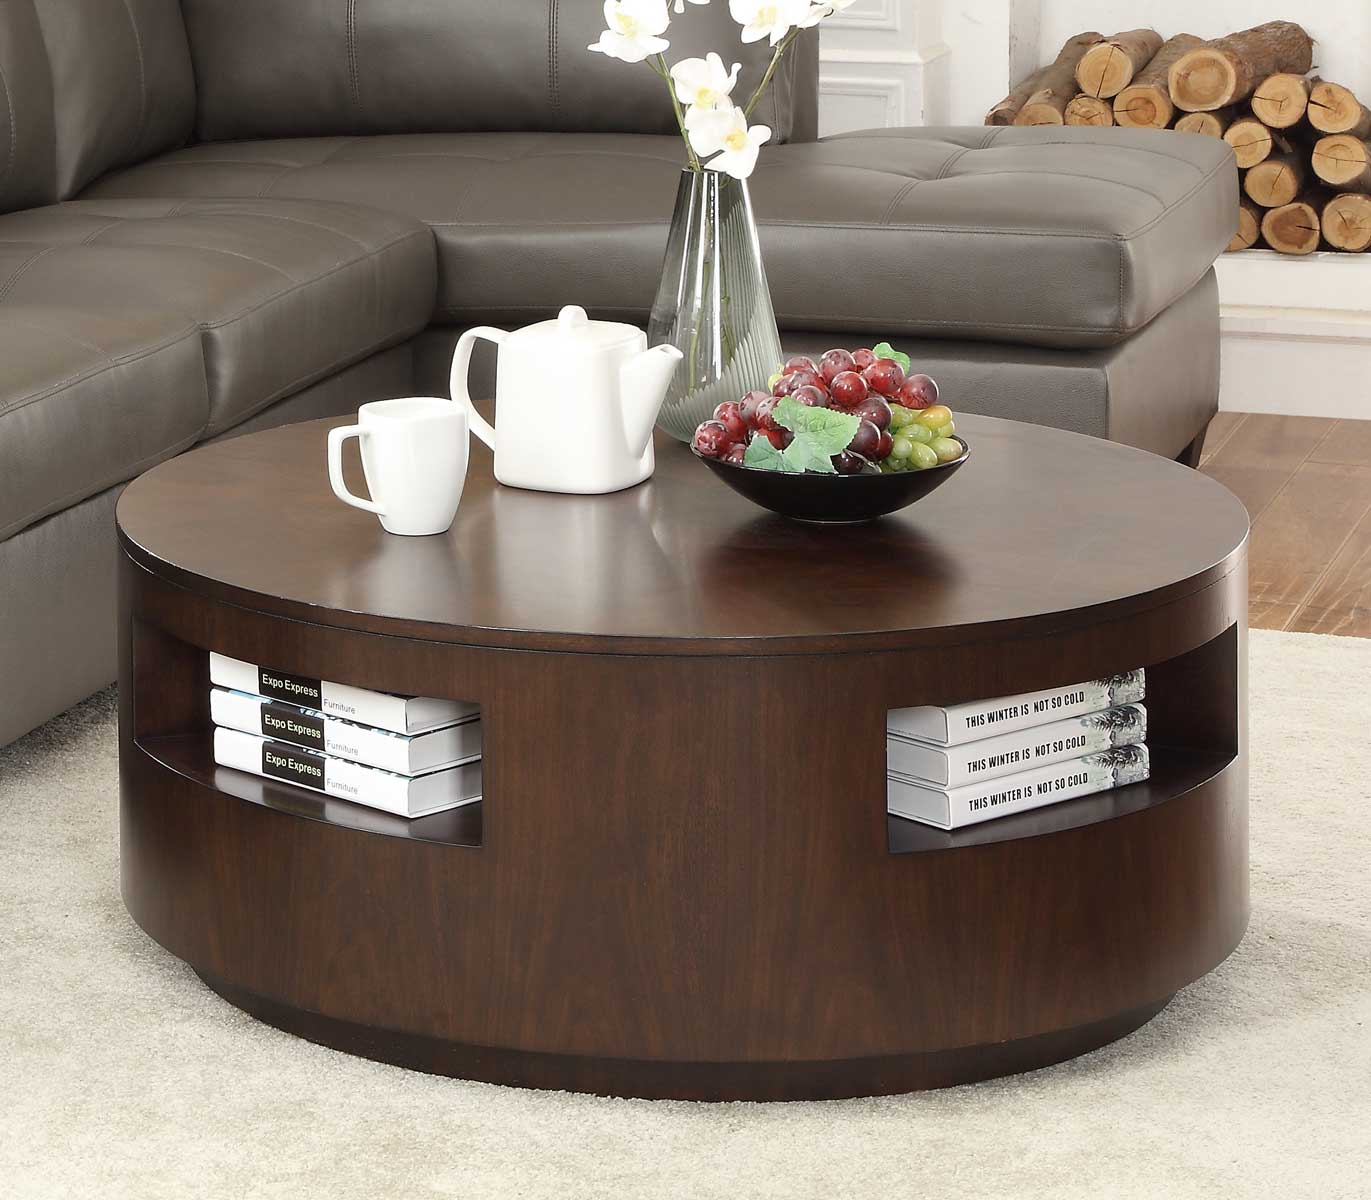 Homelegance Aquinnah Round Cocktail Table with Casters - Dark Cherry